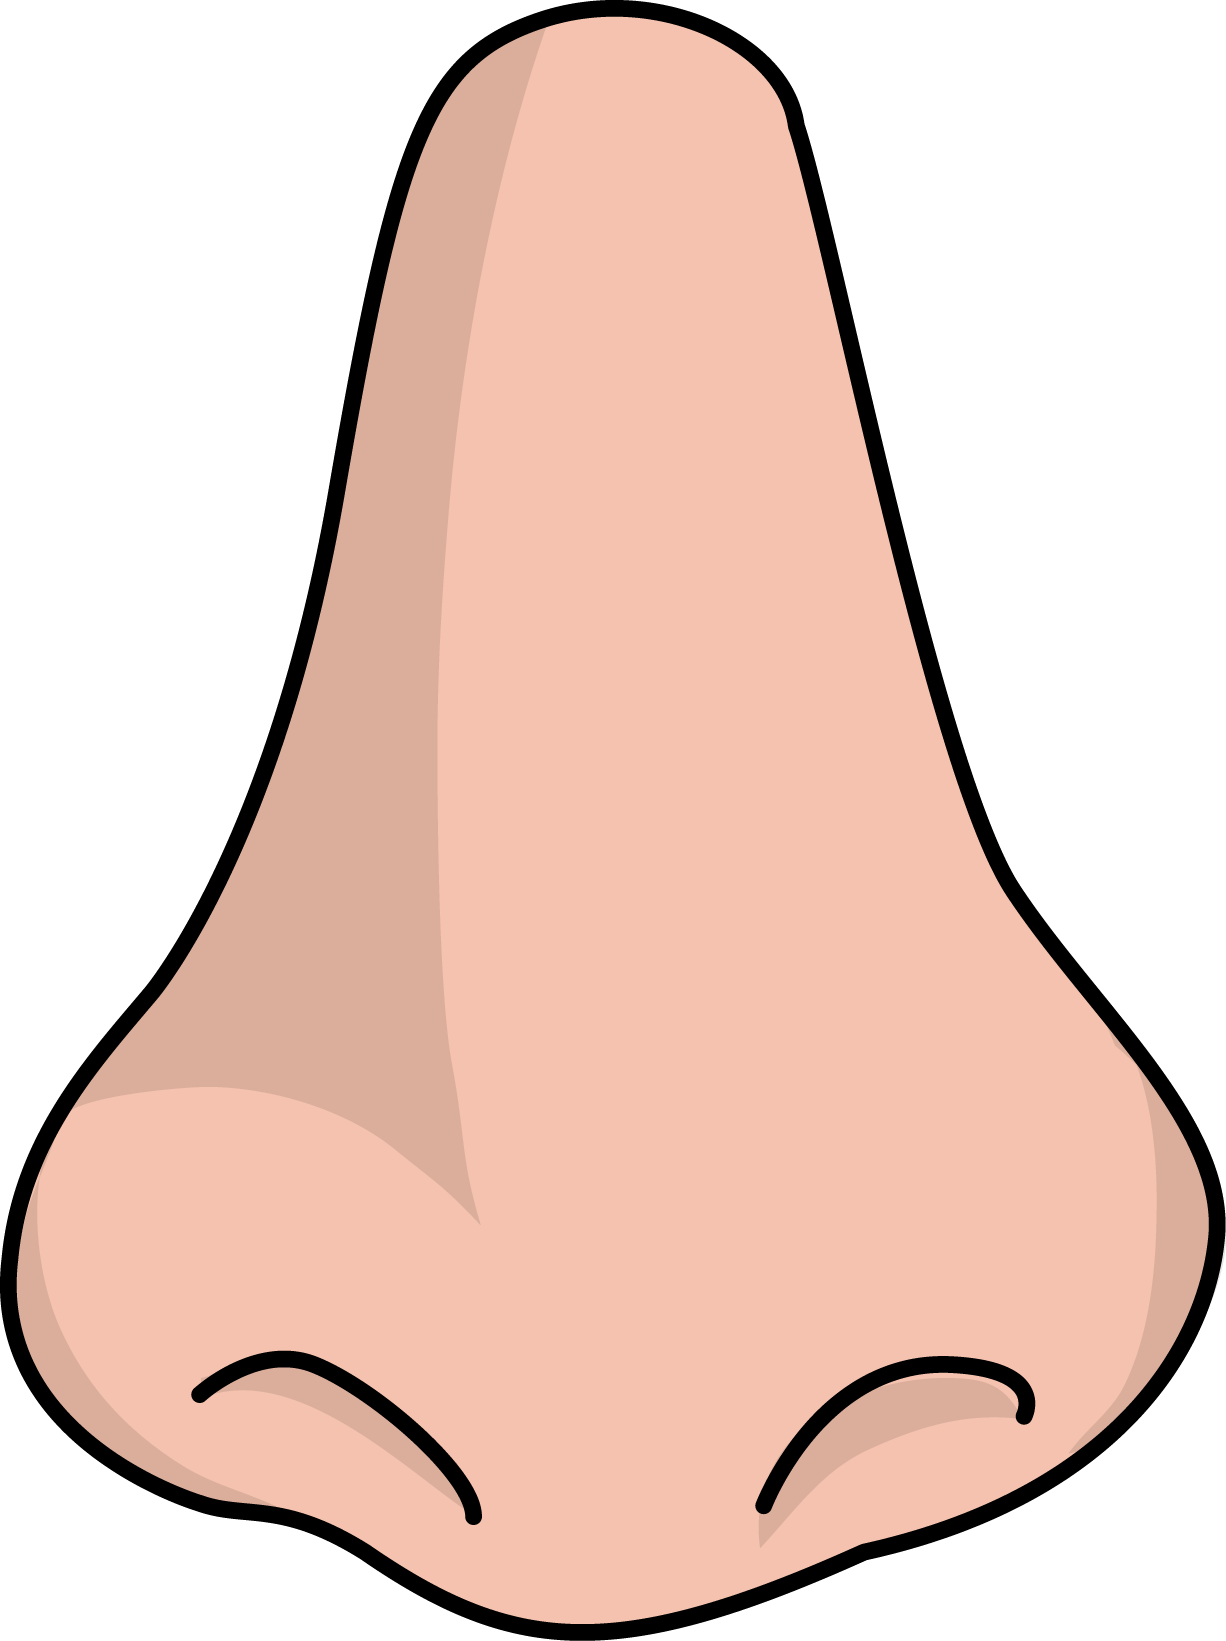 Clipart kid nose.